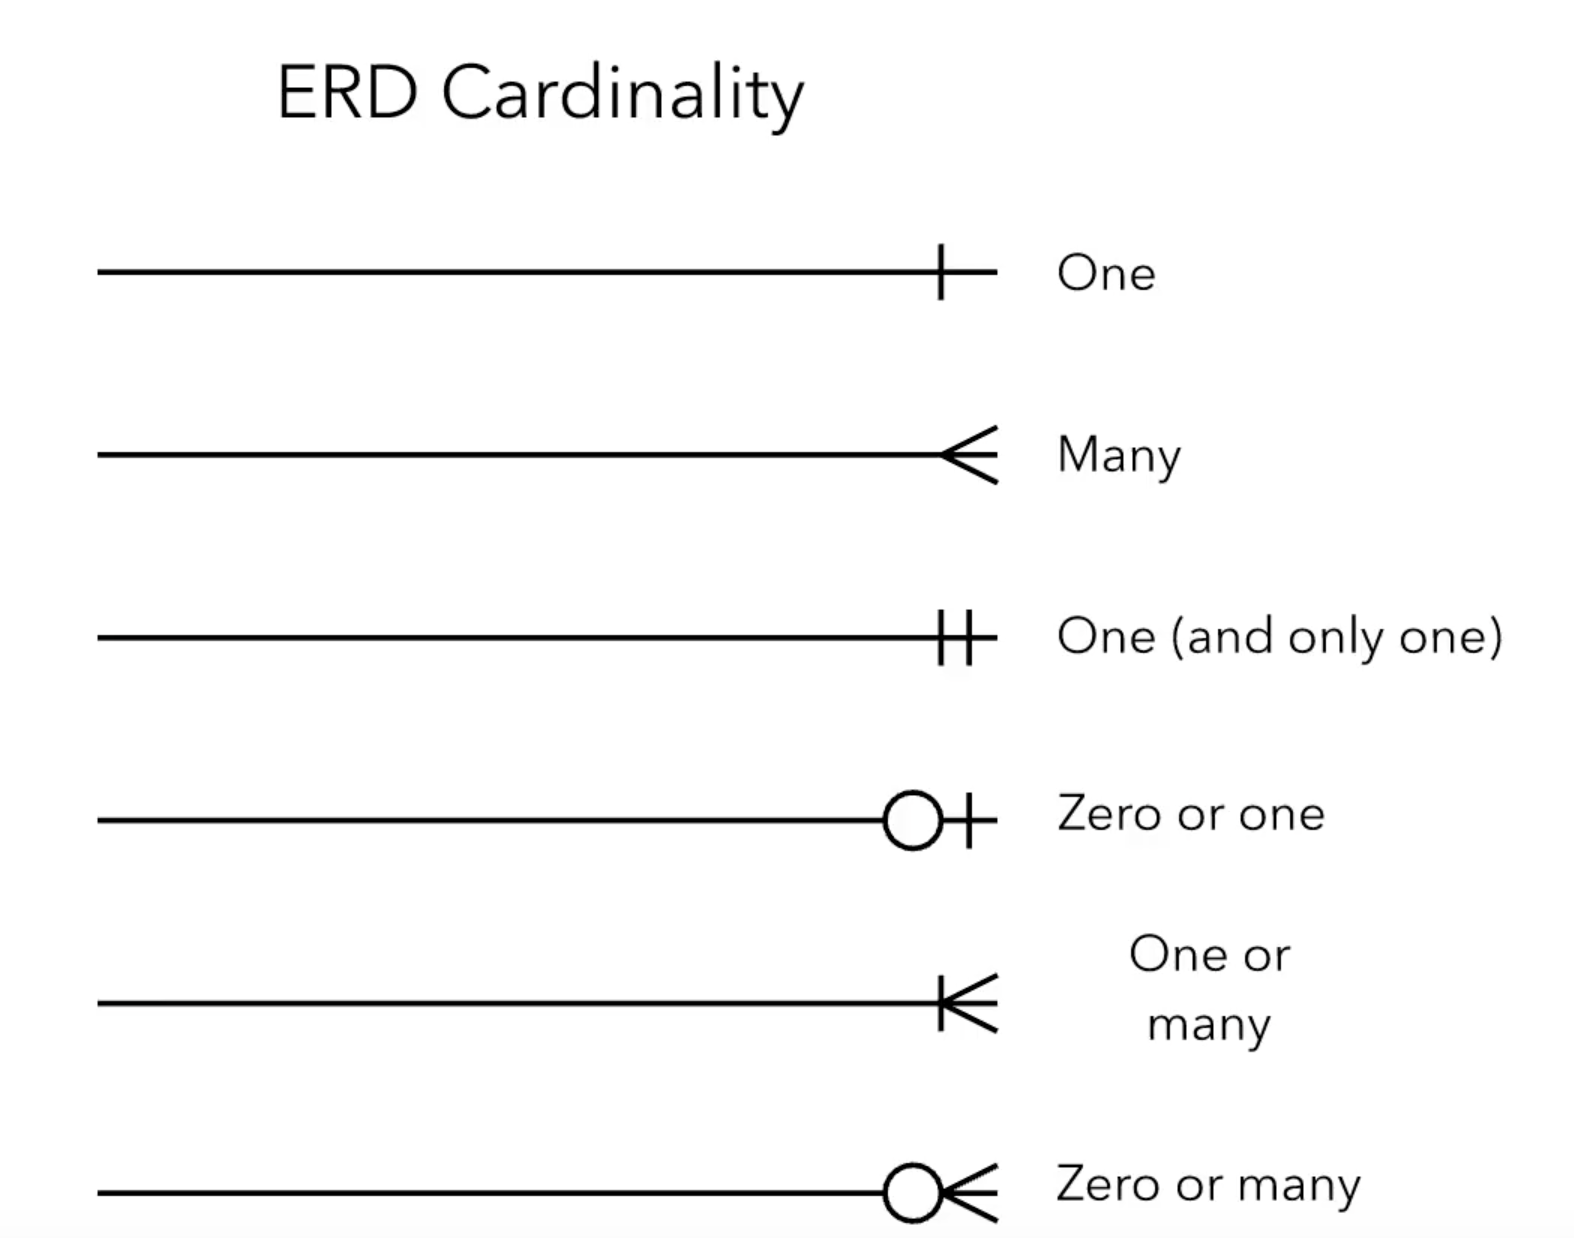 Er Diagram - Are The Relations And Cardinalities Correct